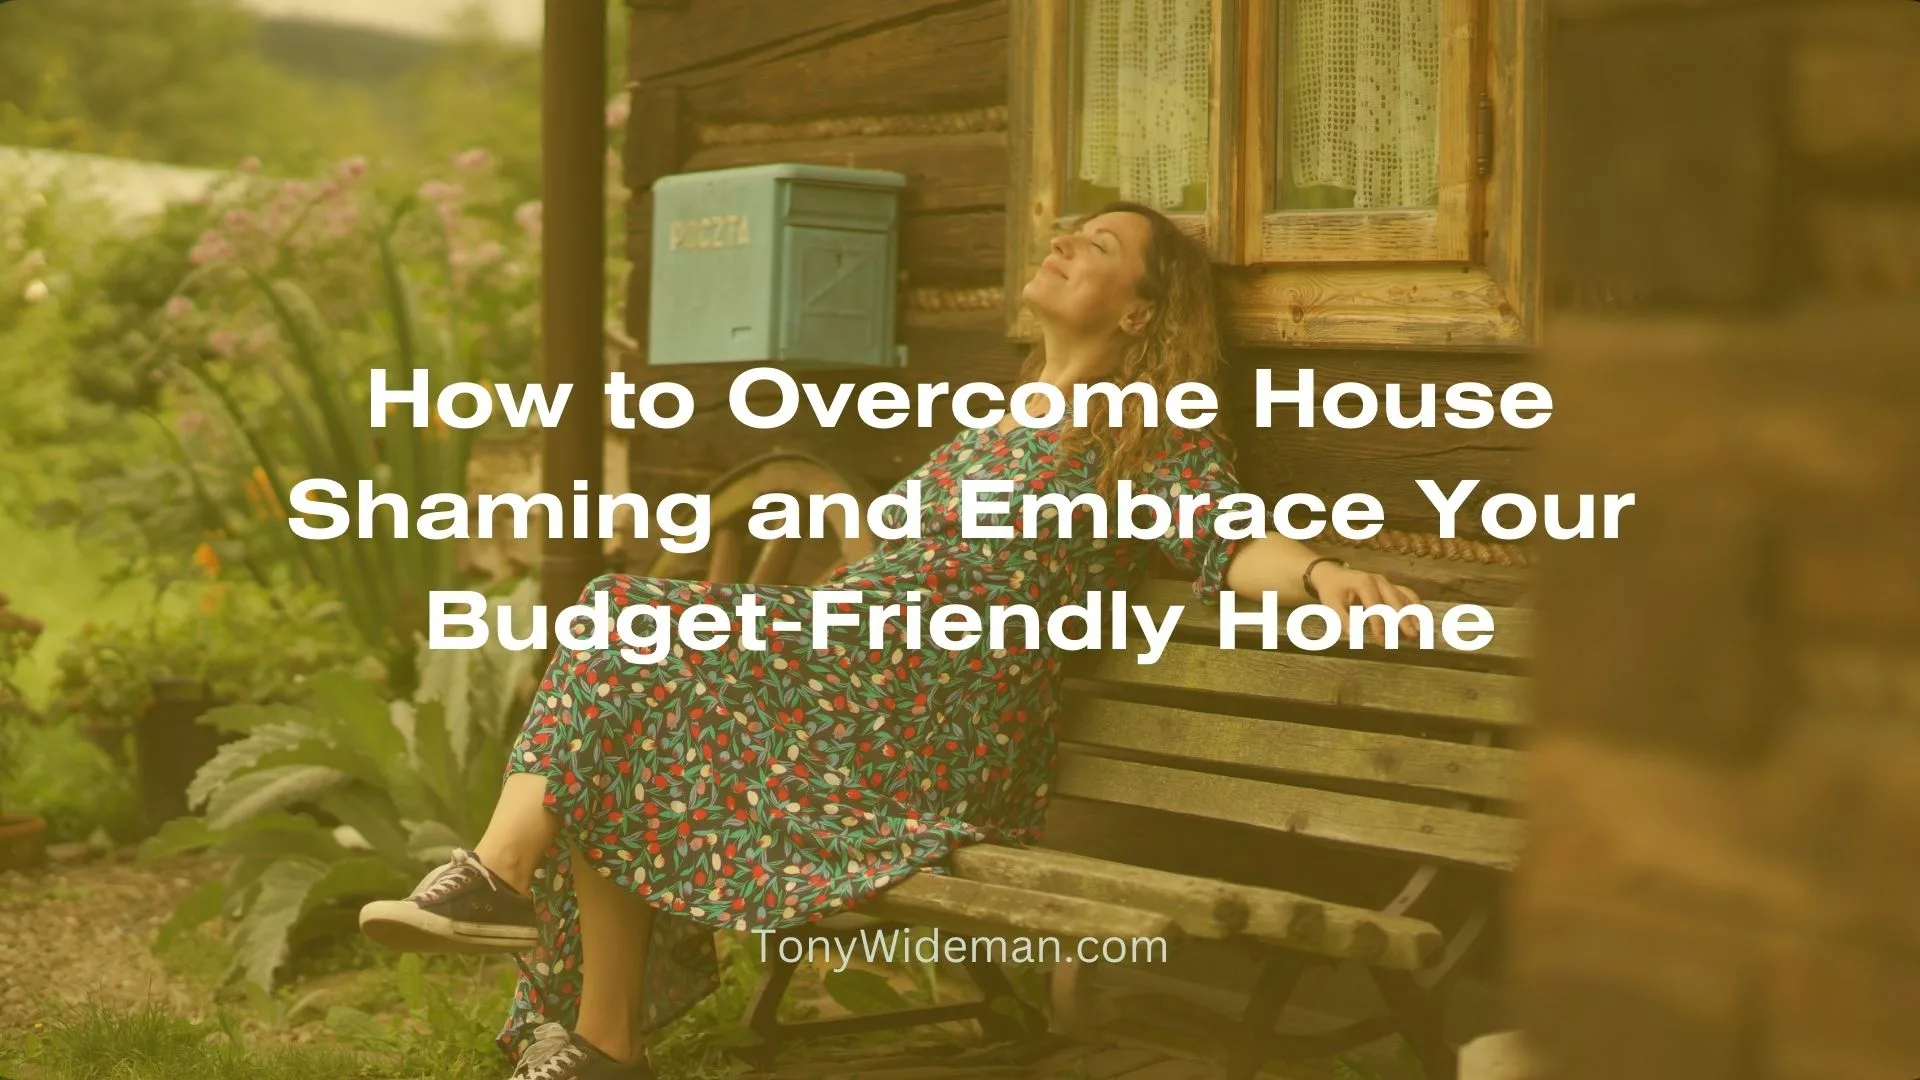 How to Overcome House Shaming and Embrace Your Budget-Friendly Home